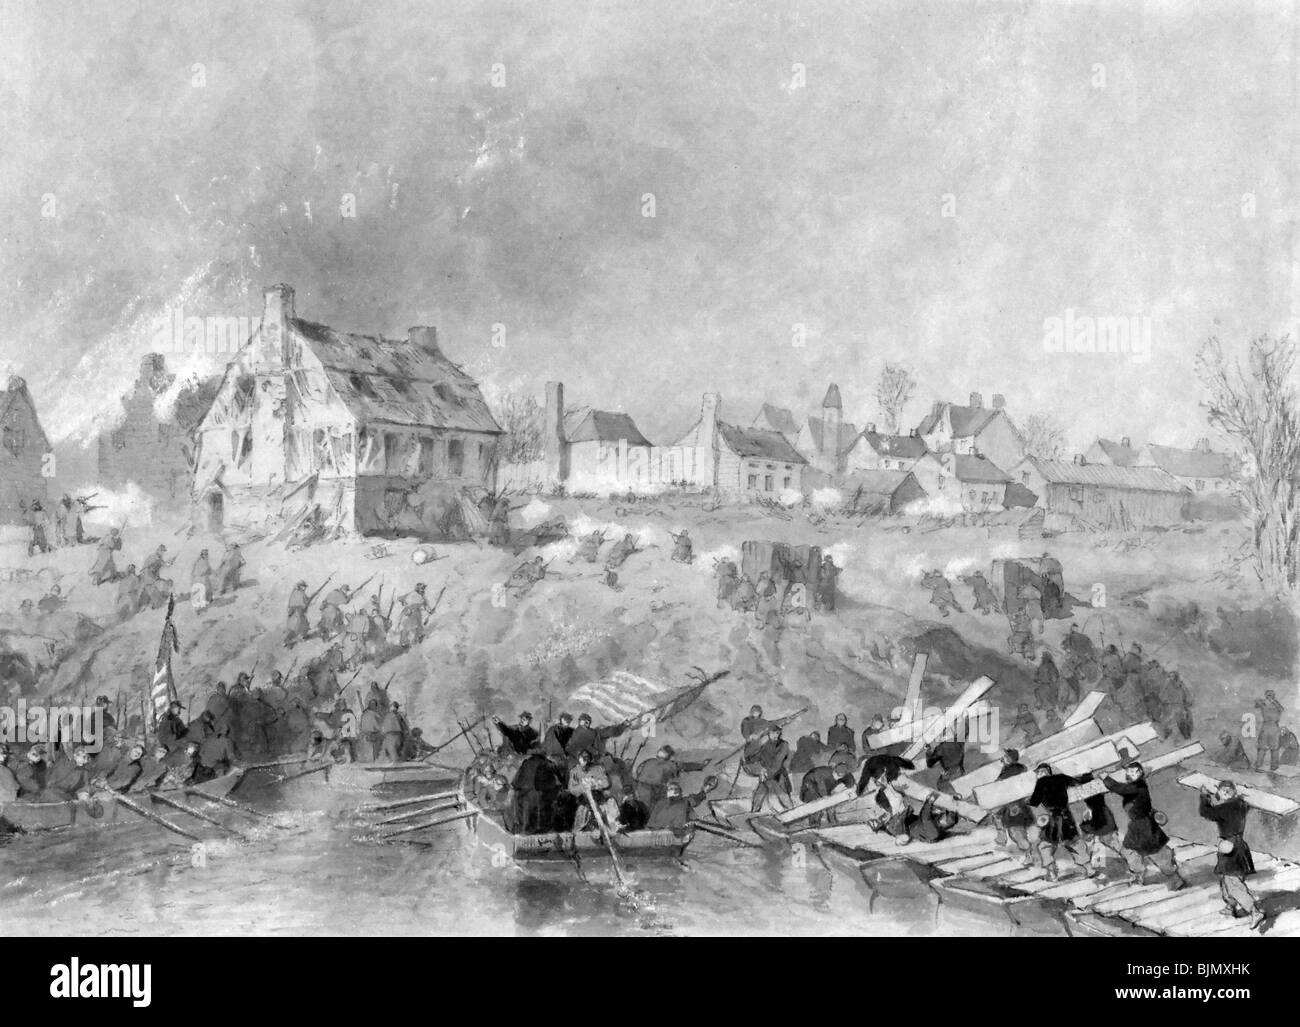 Attack on Fredericksburg Union troops landing on shore of river during USA Civil War, 1862 Stock Photo